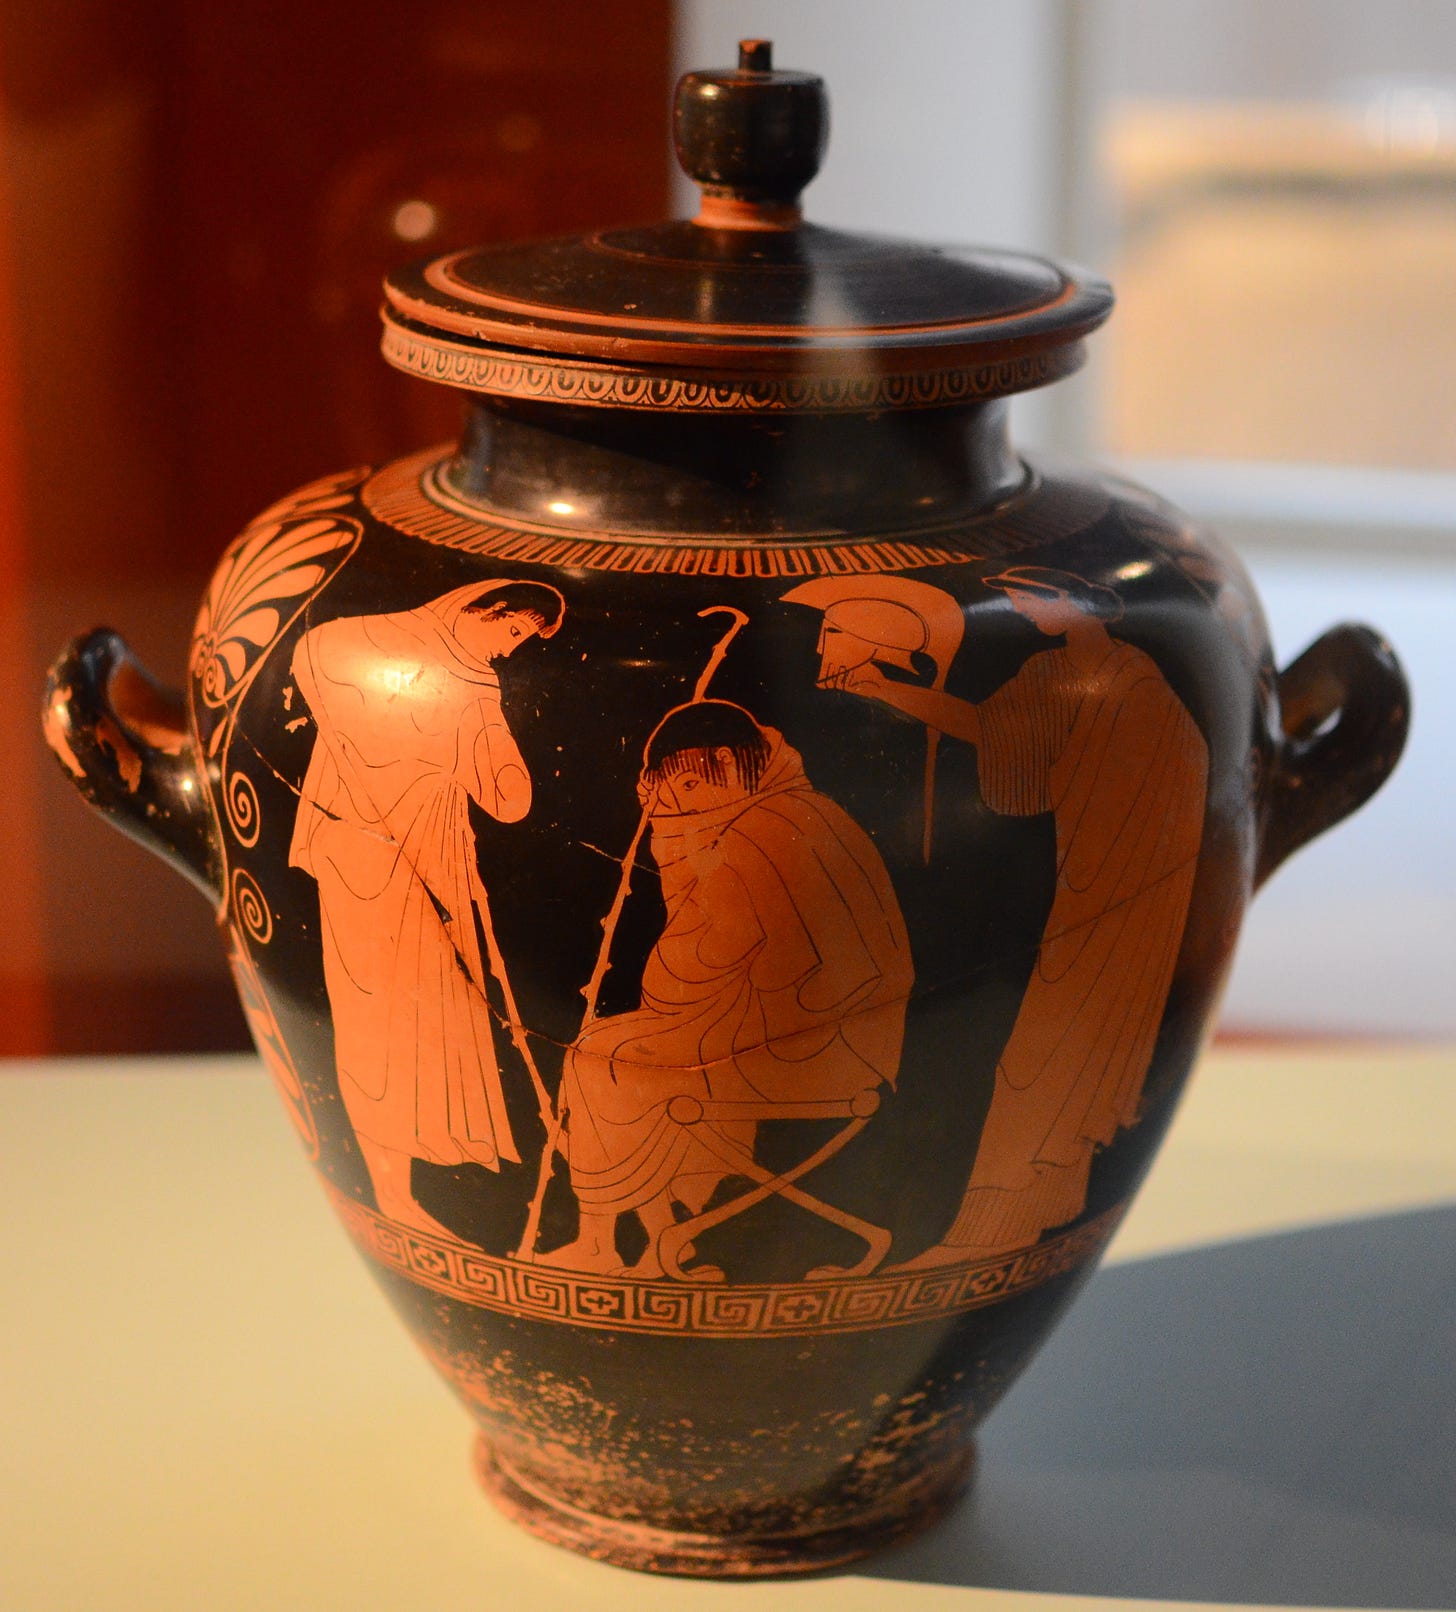 Attic red-figure stamnos with Trojan War scene. Achilles mourns the death of his friend Patroklos. To his left is Antilochos, who brought him the bad news. To his right is his mother Tethis who brings him new weapons in order for him to participate in the war again.